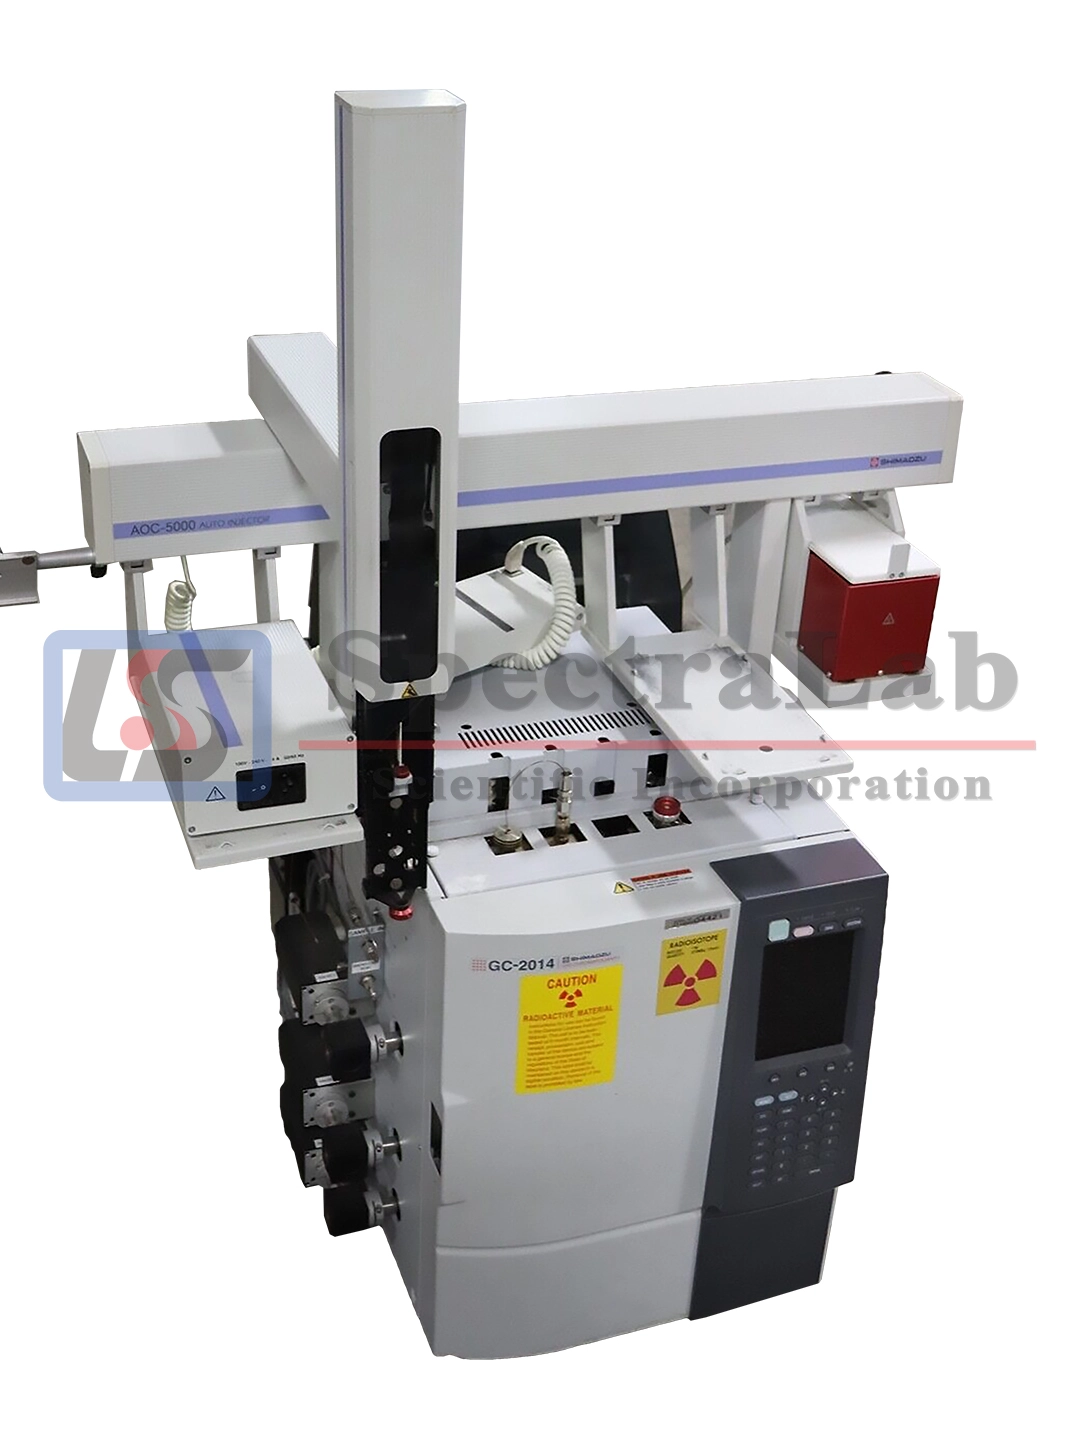 Shimadzu GC-2014 with ECD and FID with CTC Combi PAL Autosampler